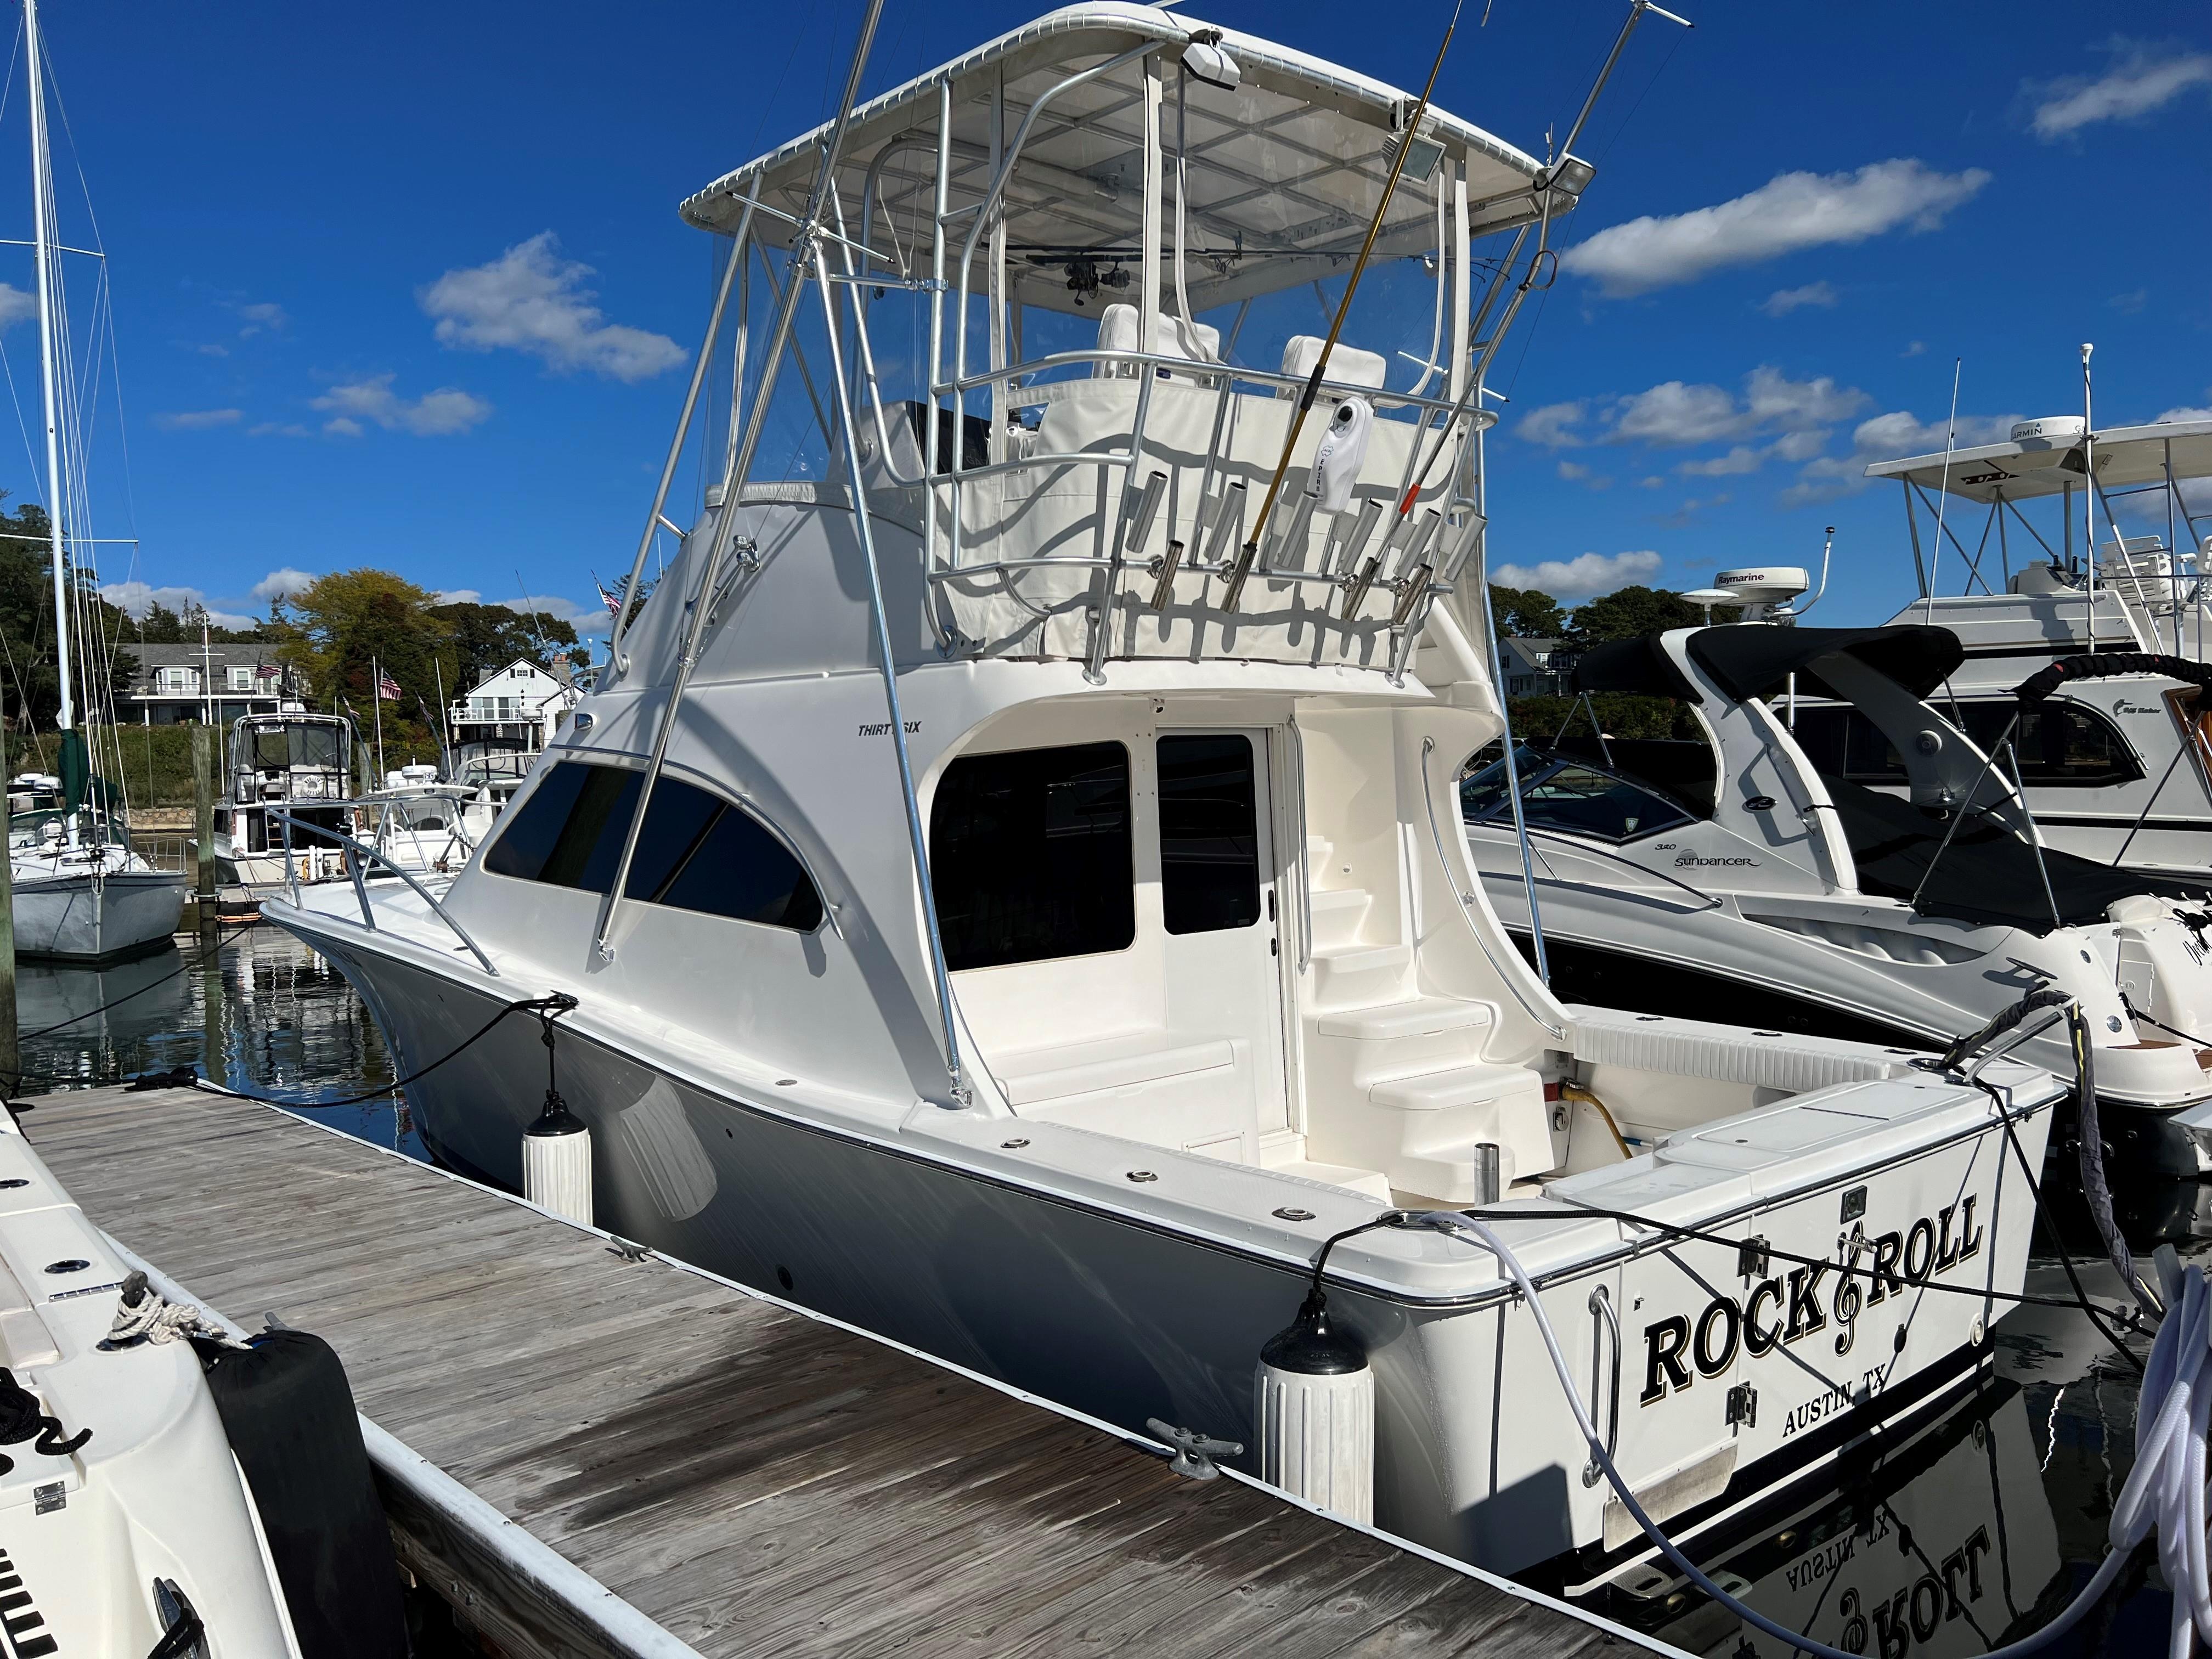 36 ft Luhrs 36 Convertible Profile, at dock